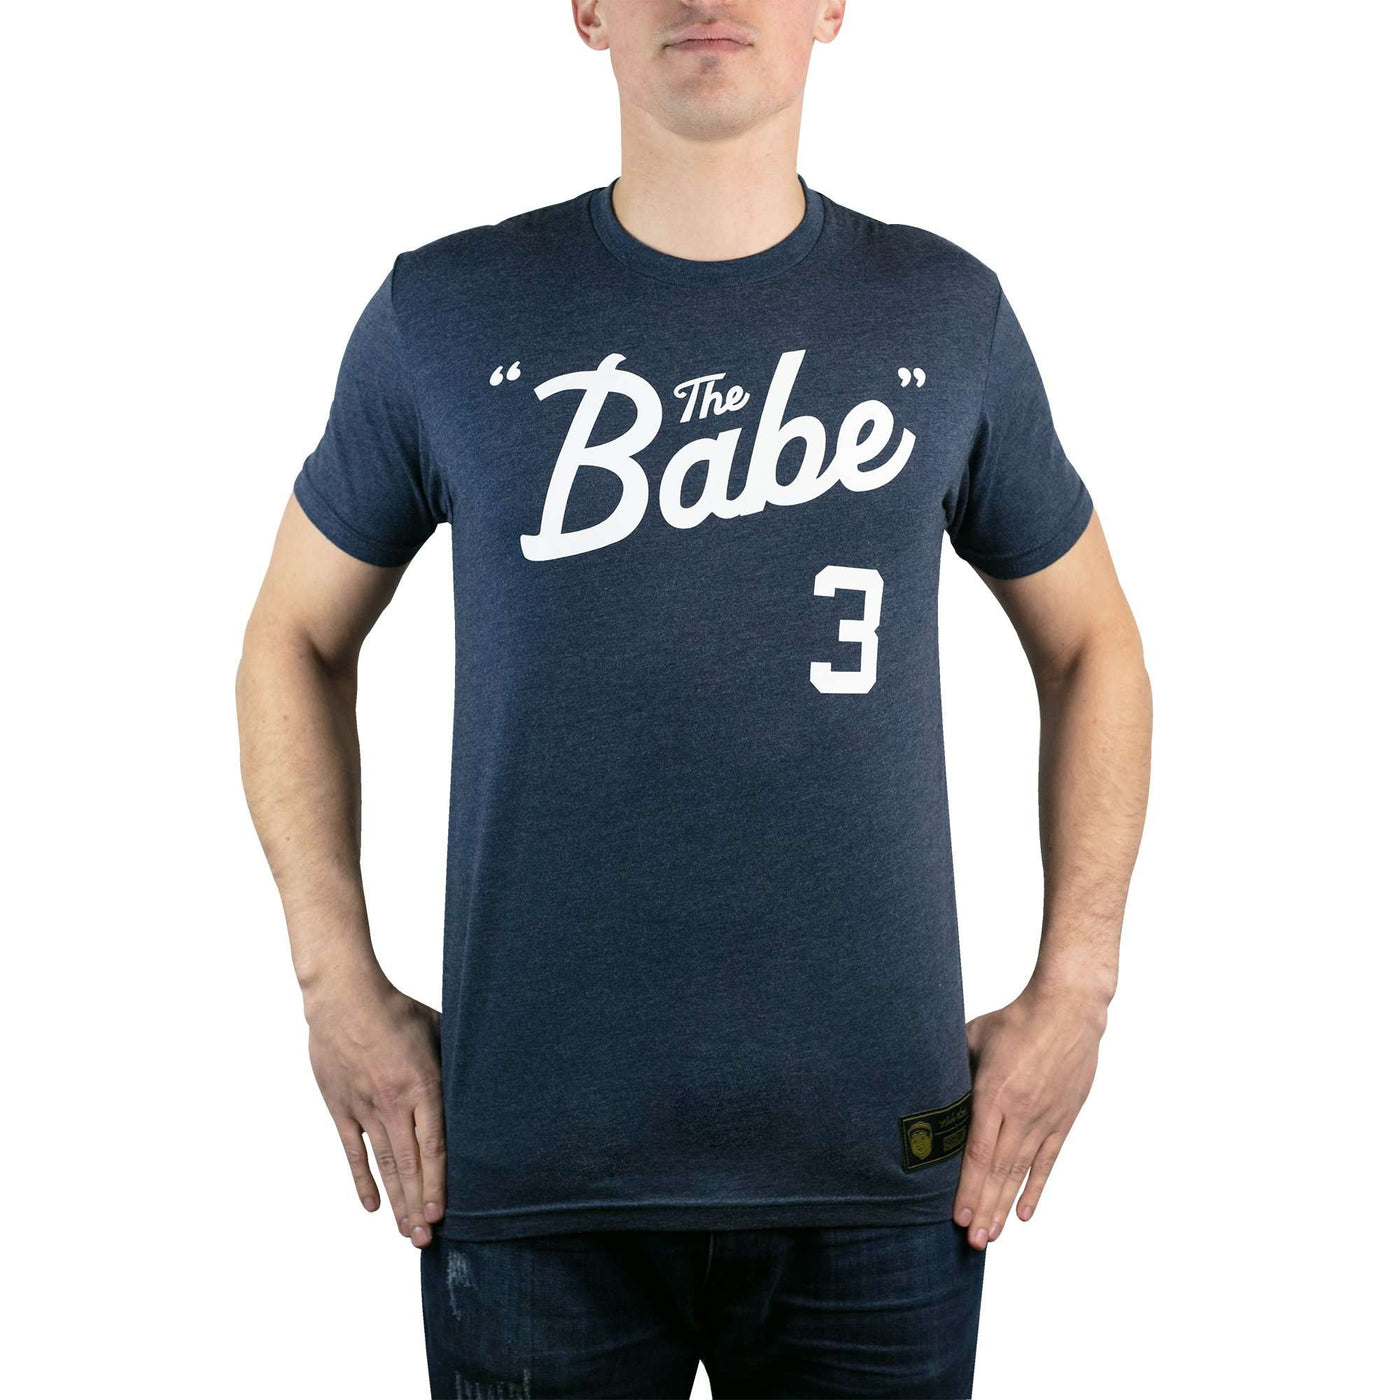 youth babe ruth jersey